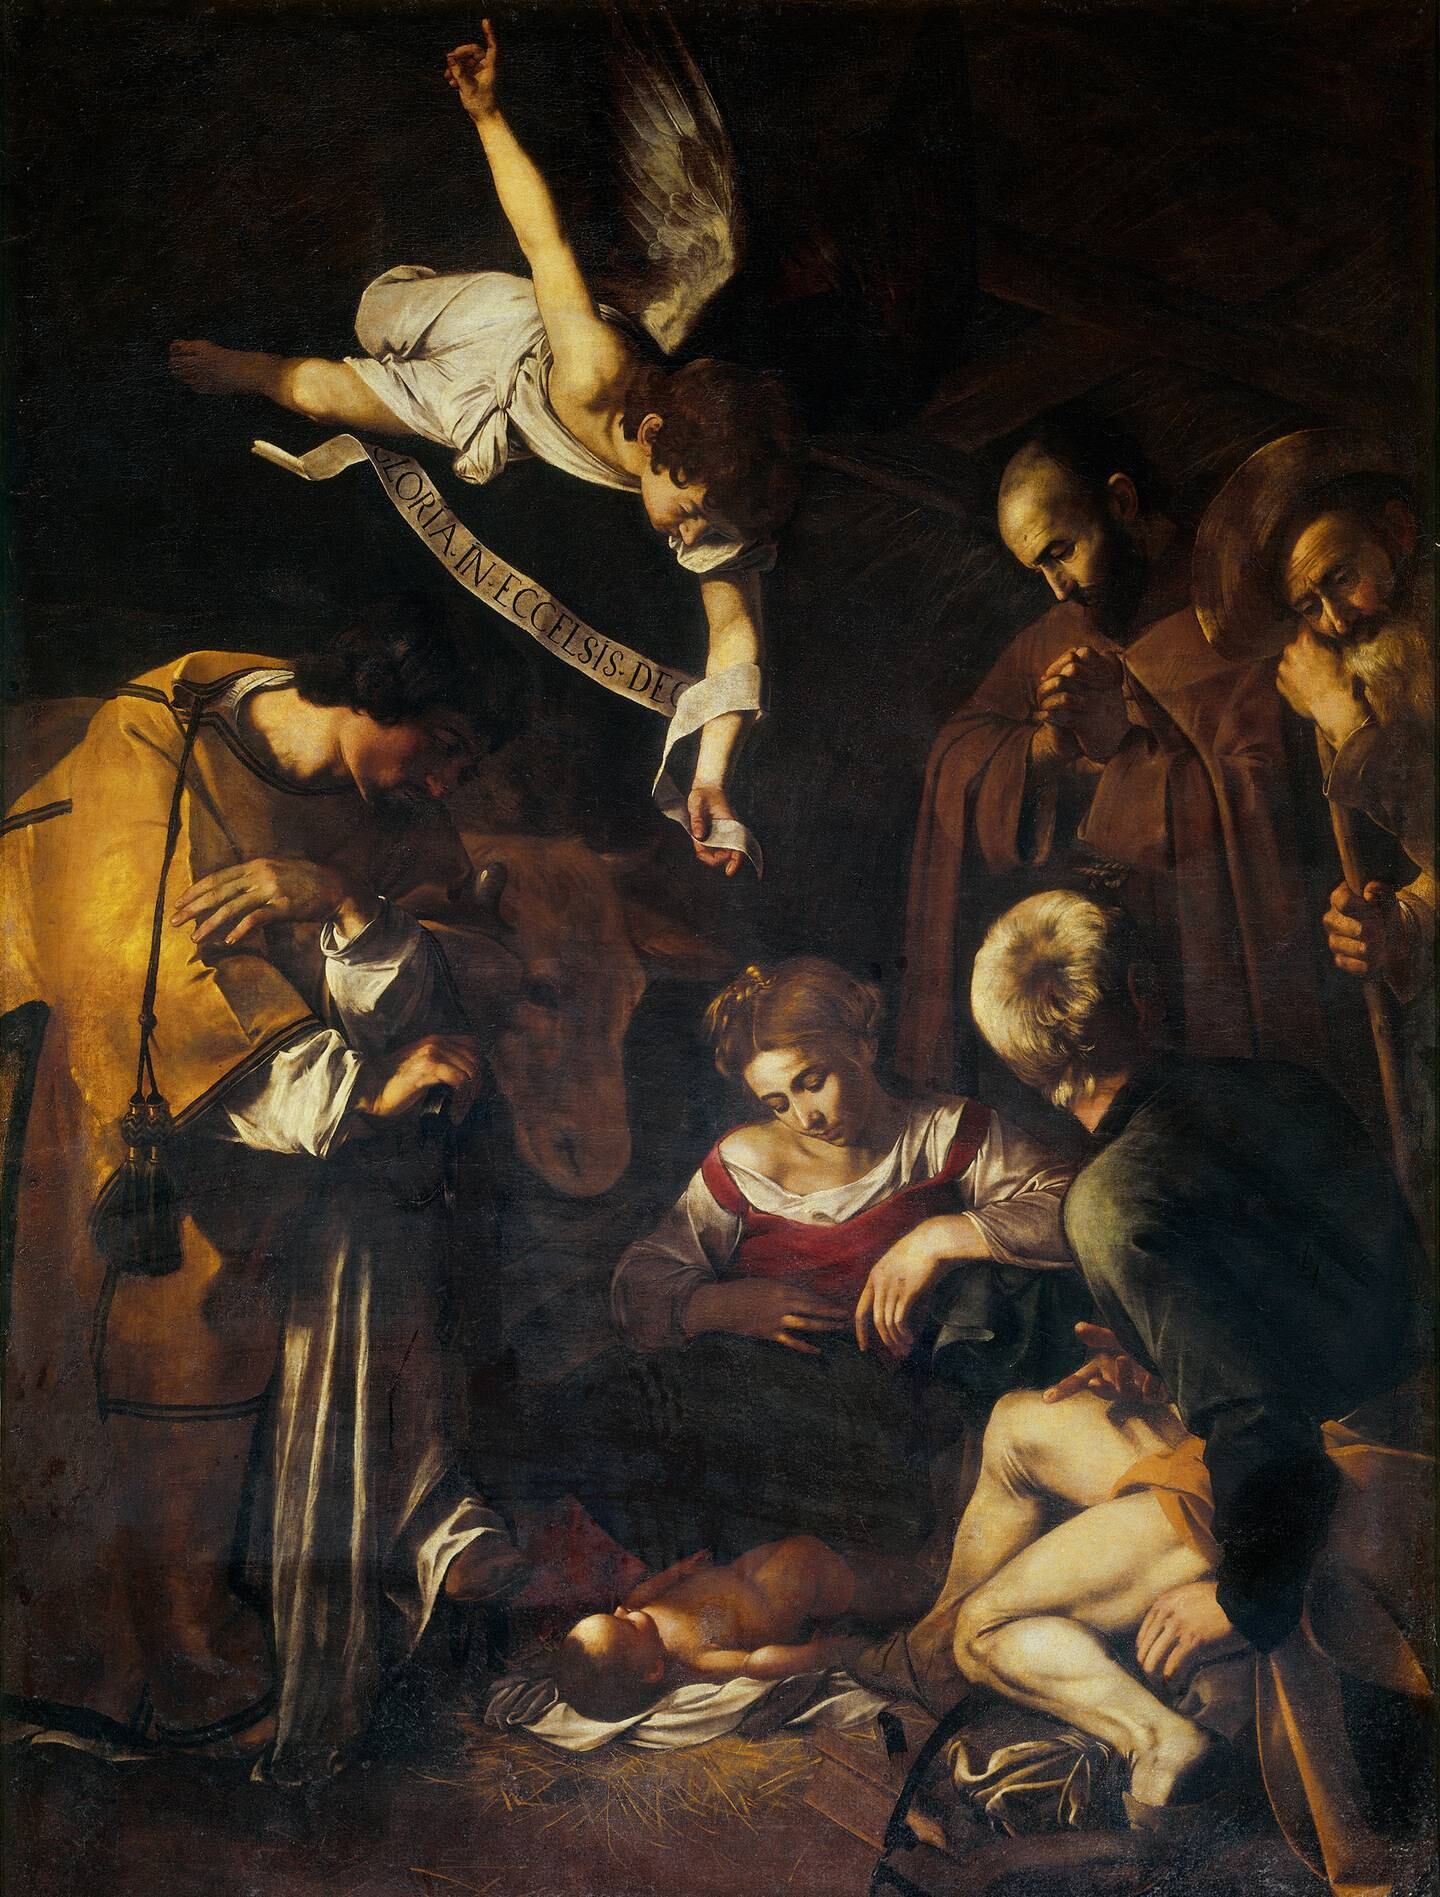 Caravaggio's 'Nativity with St Francis and St Lawrence' (1609)  has been missing since 1969 when it was stolen from the Oratory of Saint Lawrence in Palermo. Photo: public domain